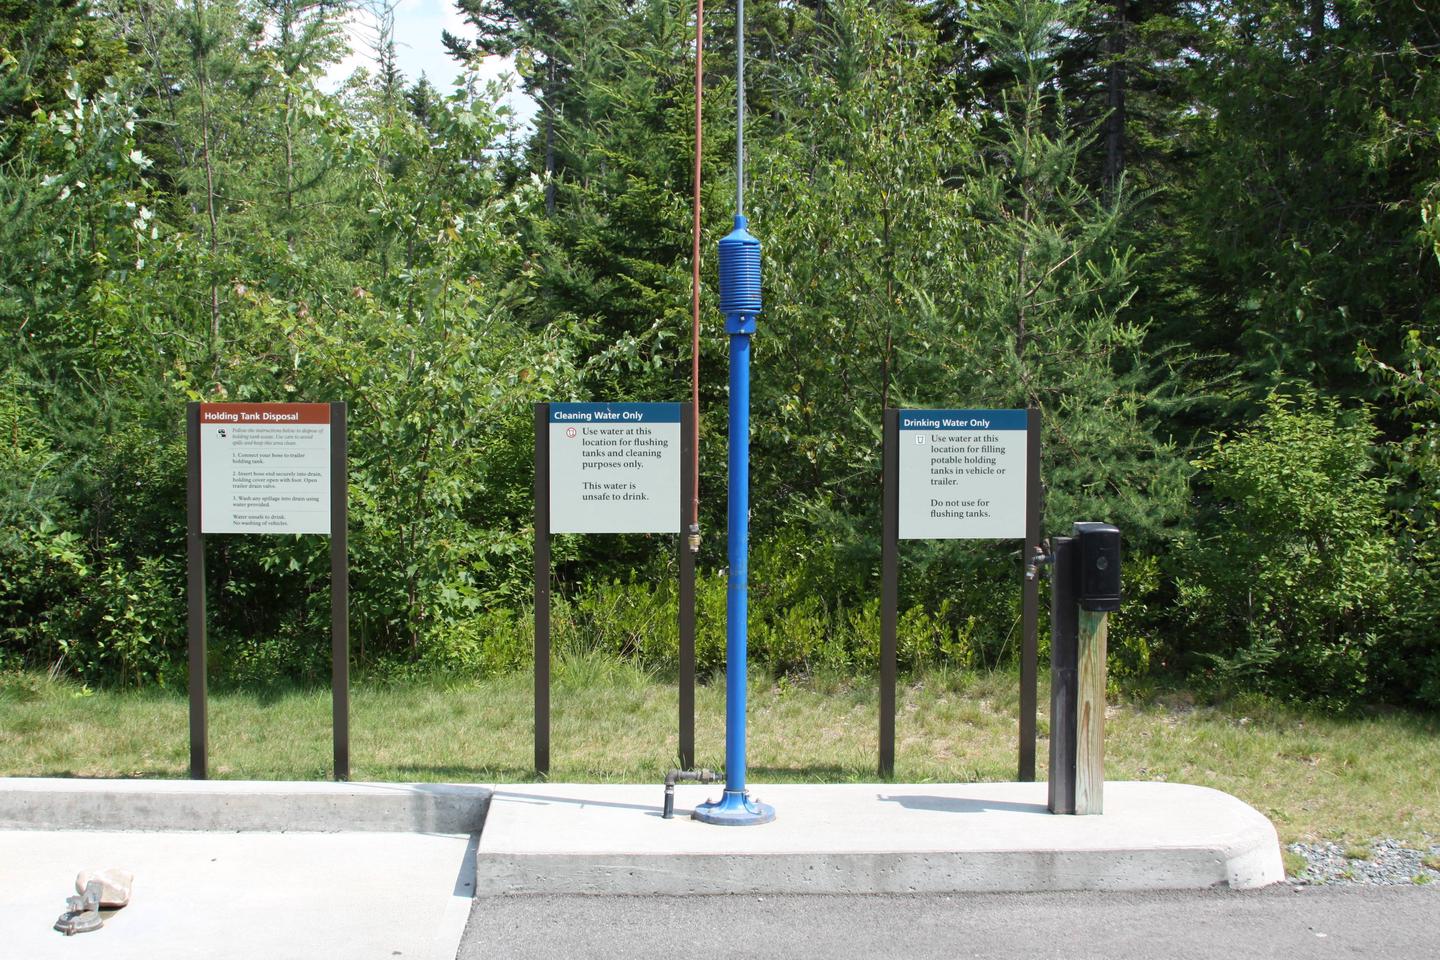 A series of three signs showing area for dumping waste, cleaning water, and drinking water with green shrubs in background.Dump station, cleaning water, and drinking water